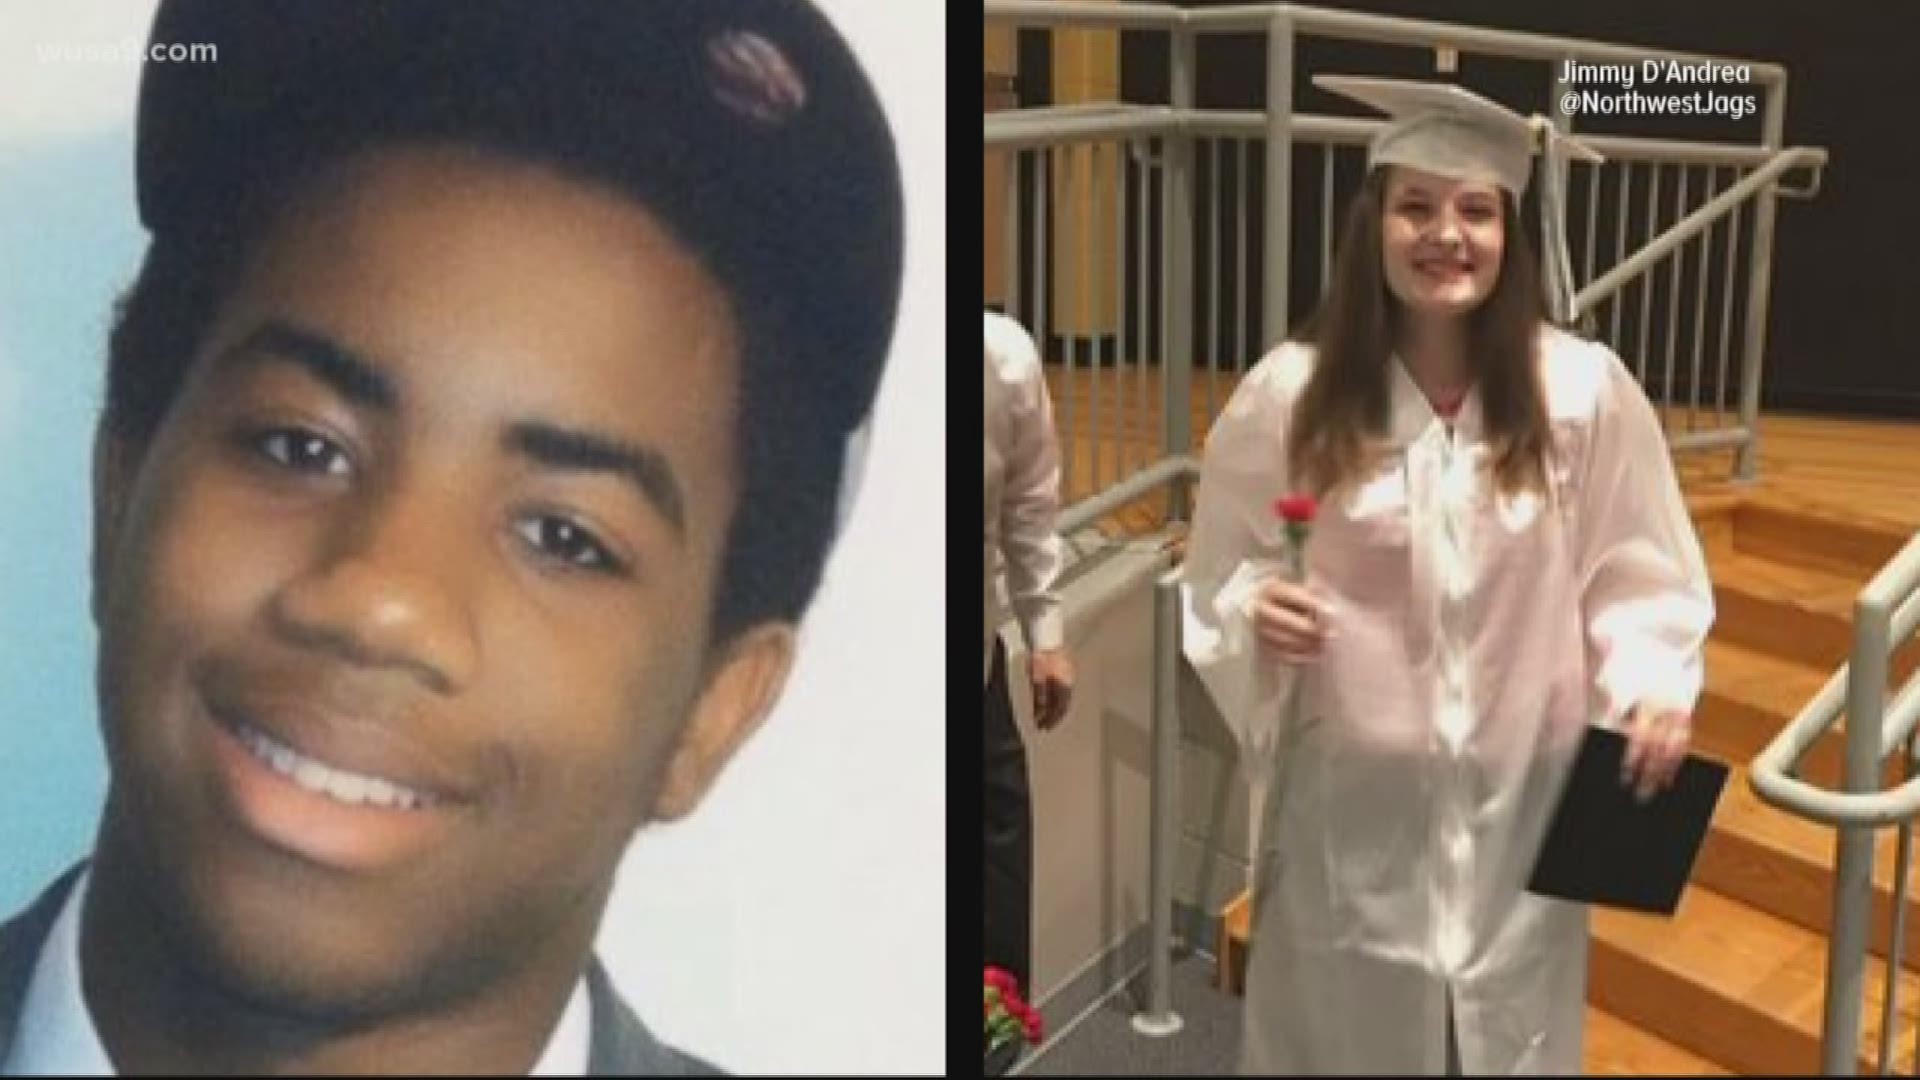 Police are investigating and two families are struggling to cope, after two former Montgomery County high school students were killed in Halifax County, Virginia.